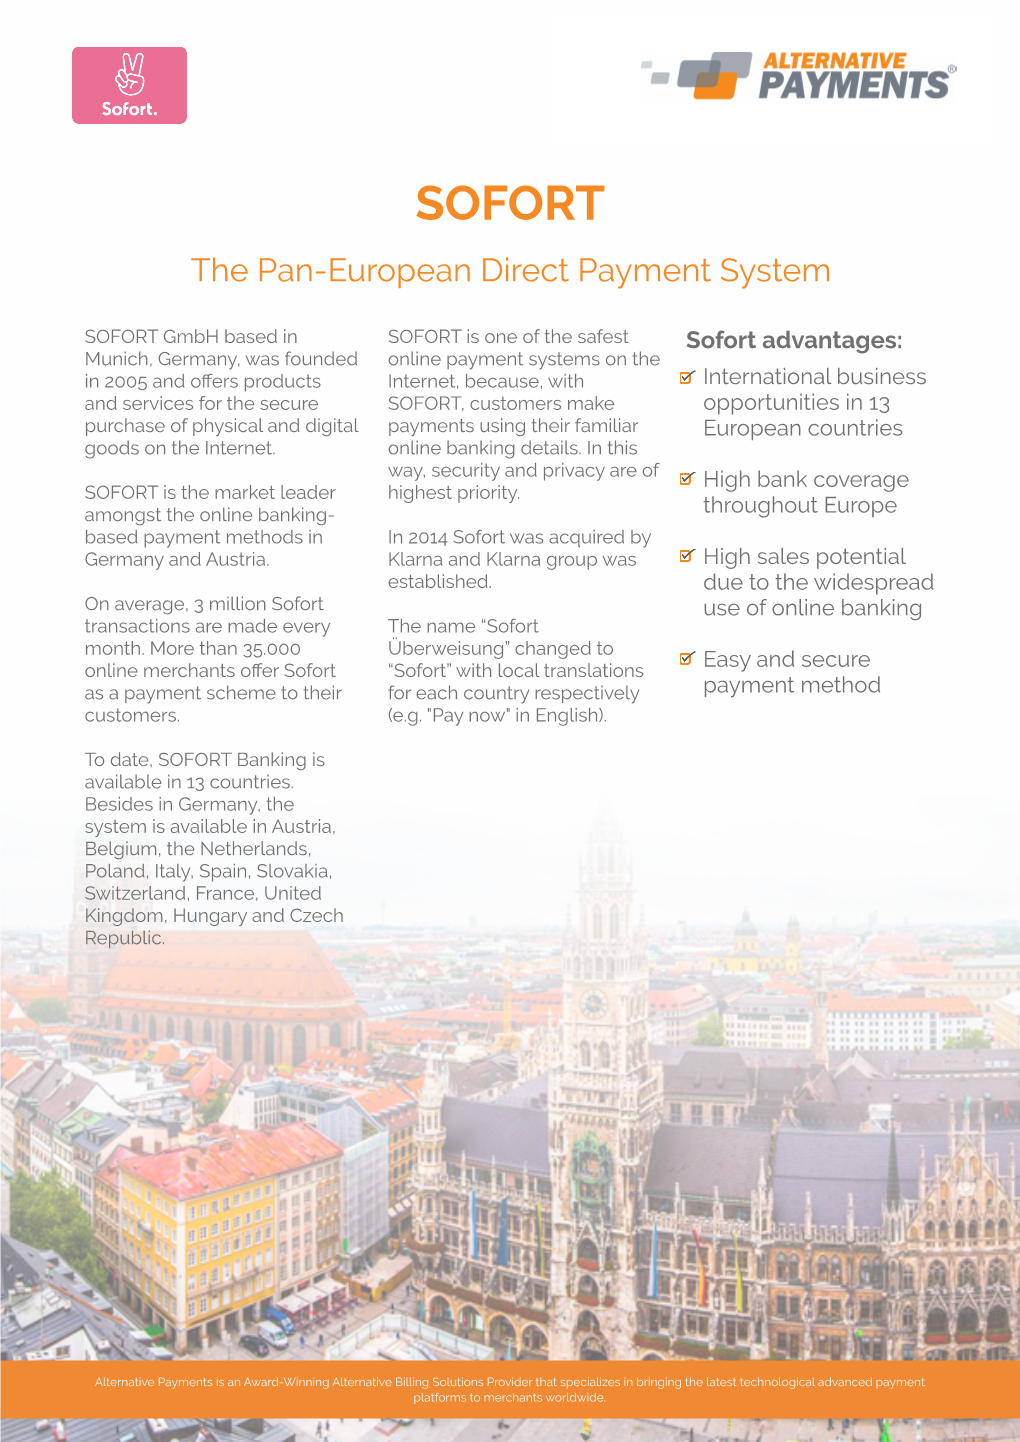 SOFORT the Pan-European Direct Payment System